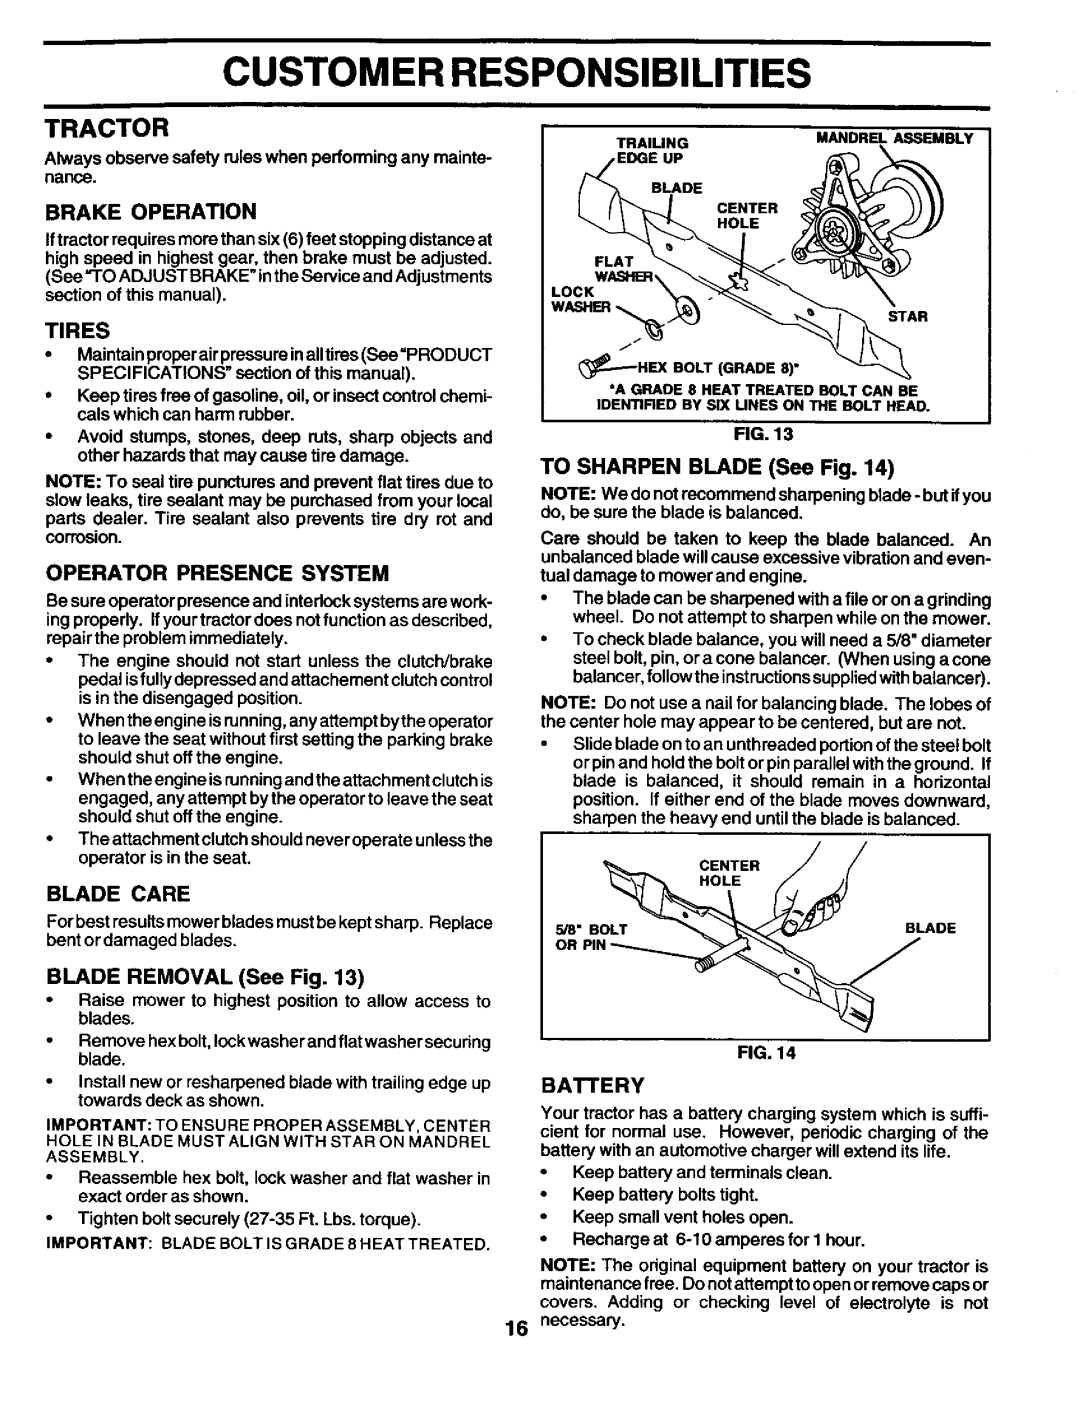 Craftsman 944.602951 owner manual Customer Responsibilities, Tractor, TO SHARPEN BLADE See Fig 